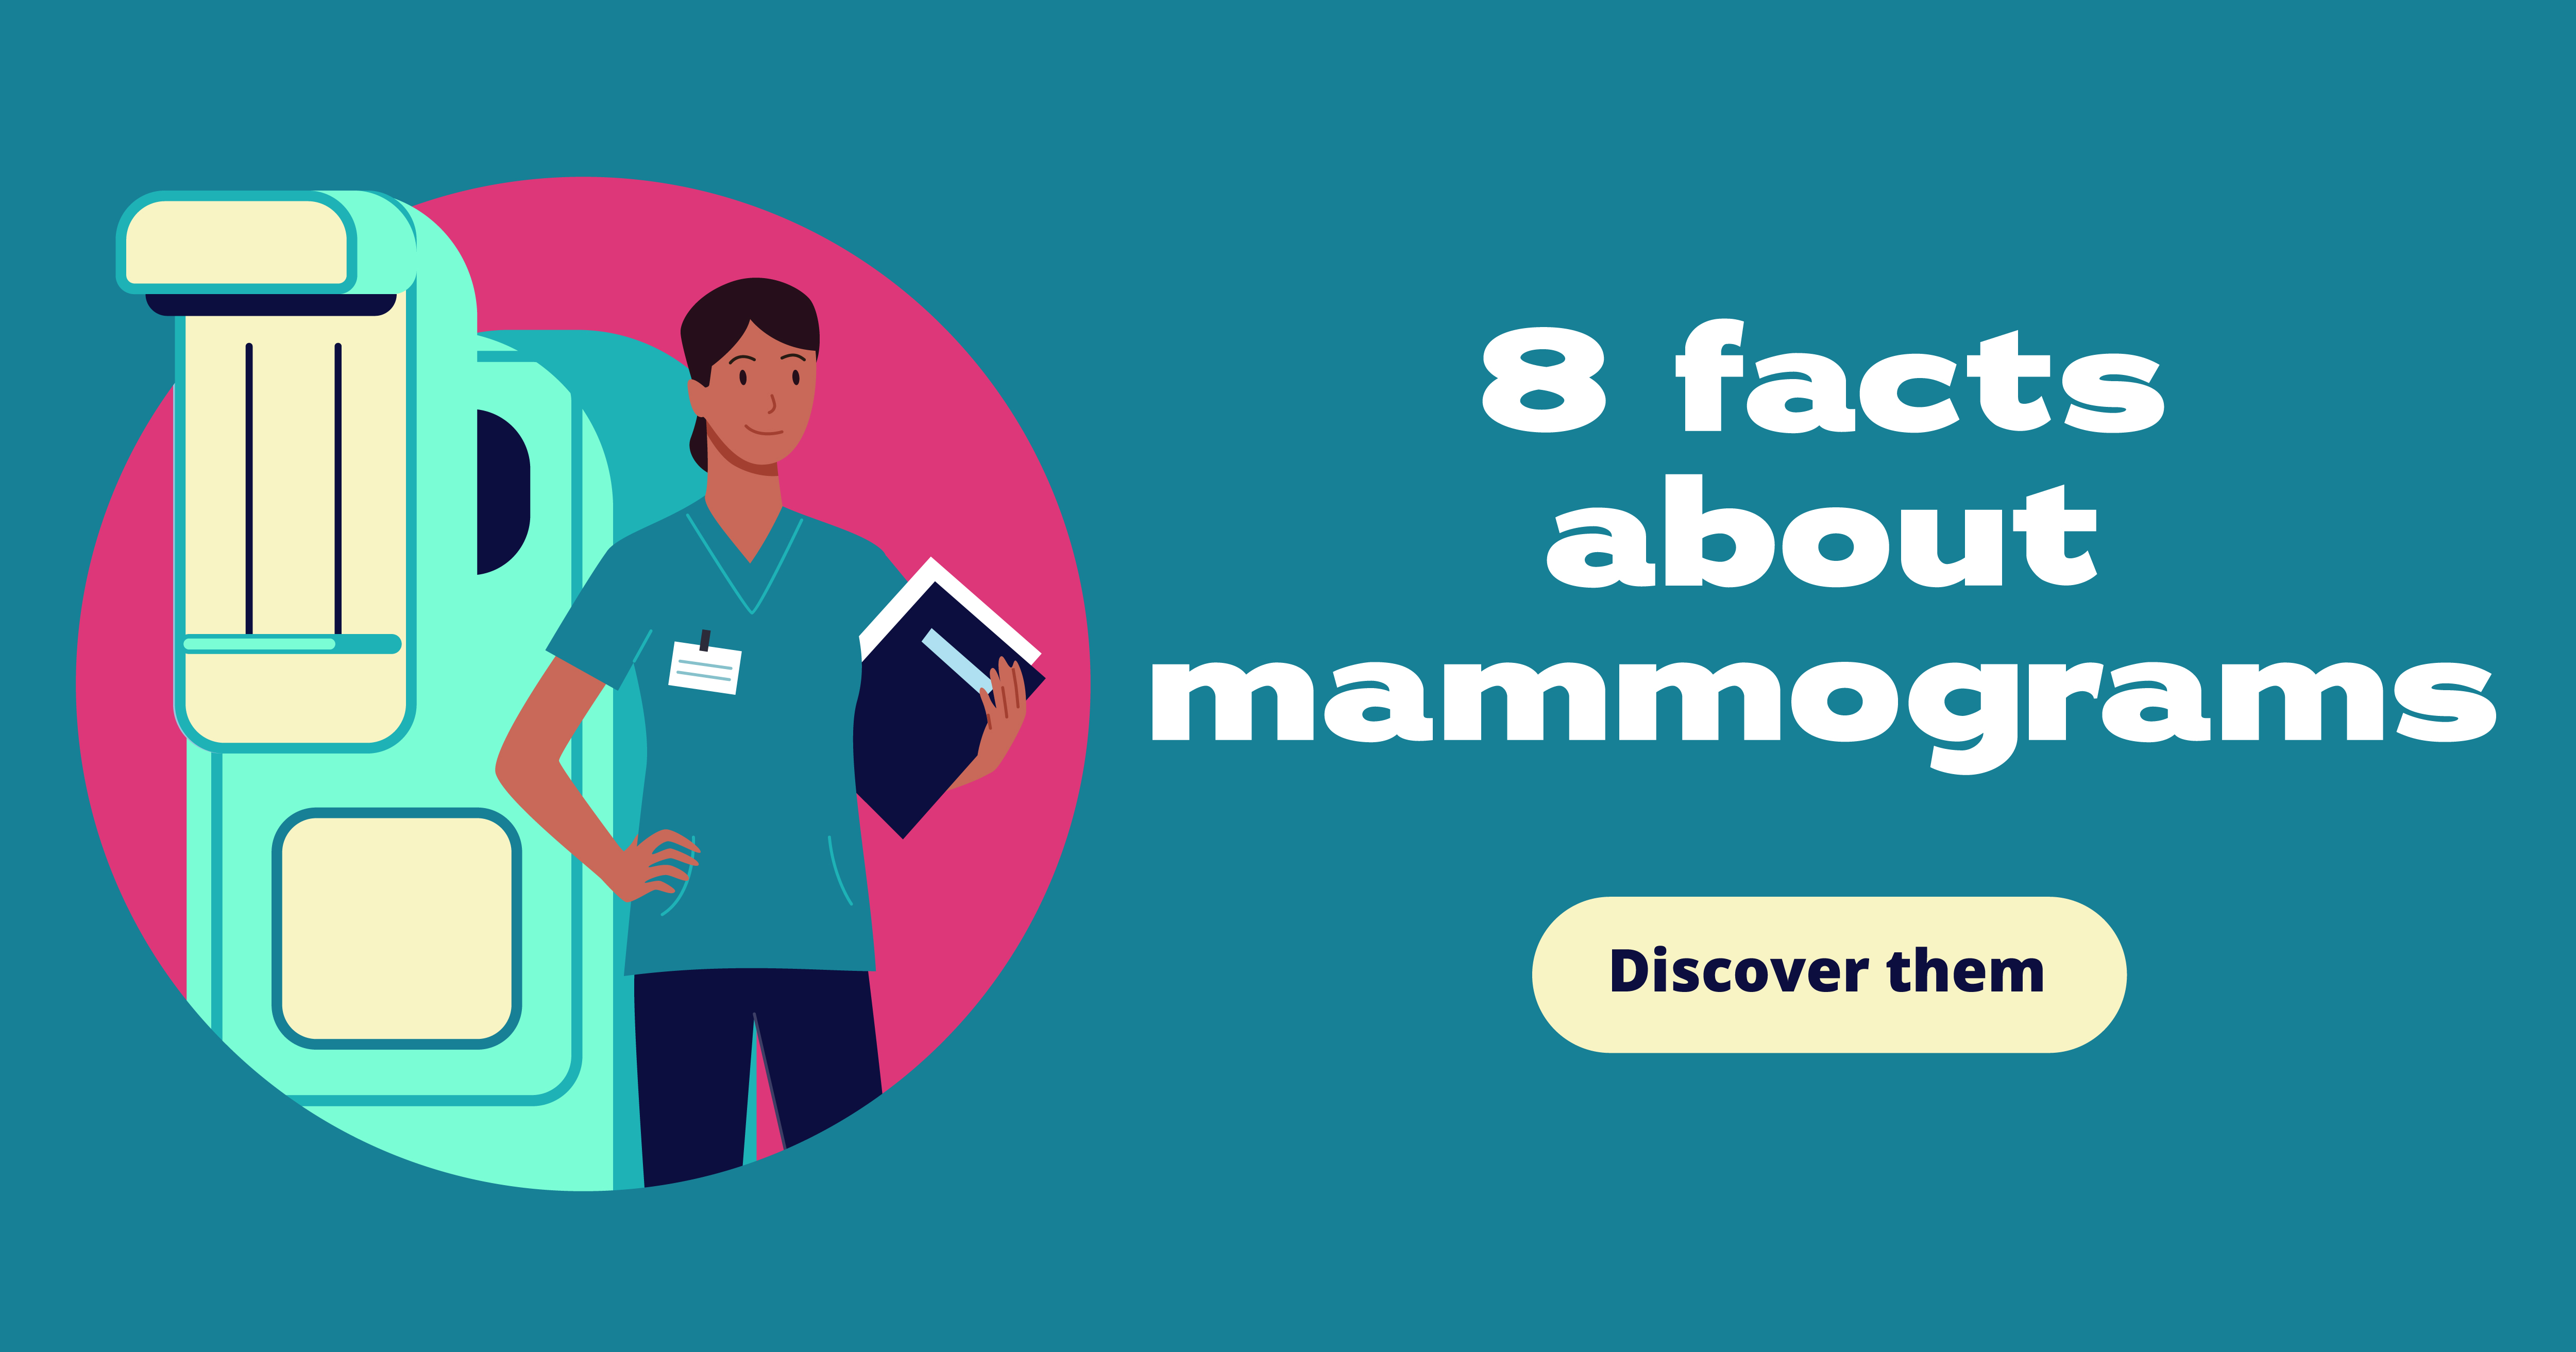 8 facts about mammograms